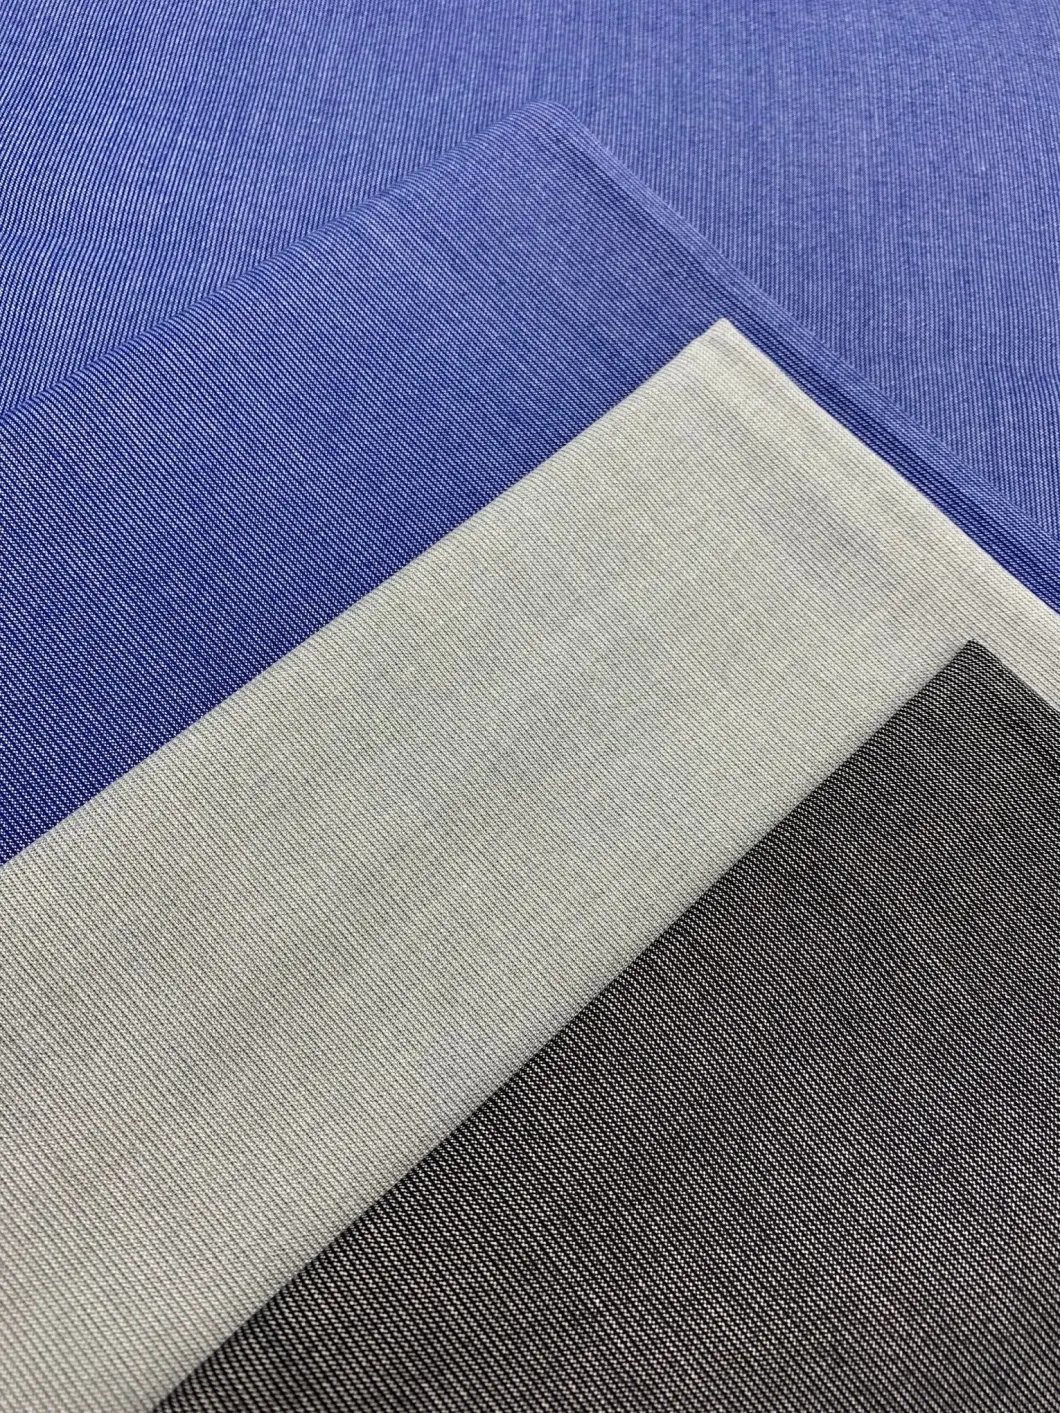 100% Polyester Brushed Woven Twill Direct Buy China Printed Disperse Suit Fabrics for Home Textile